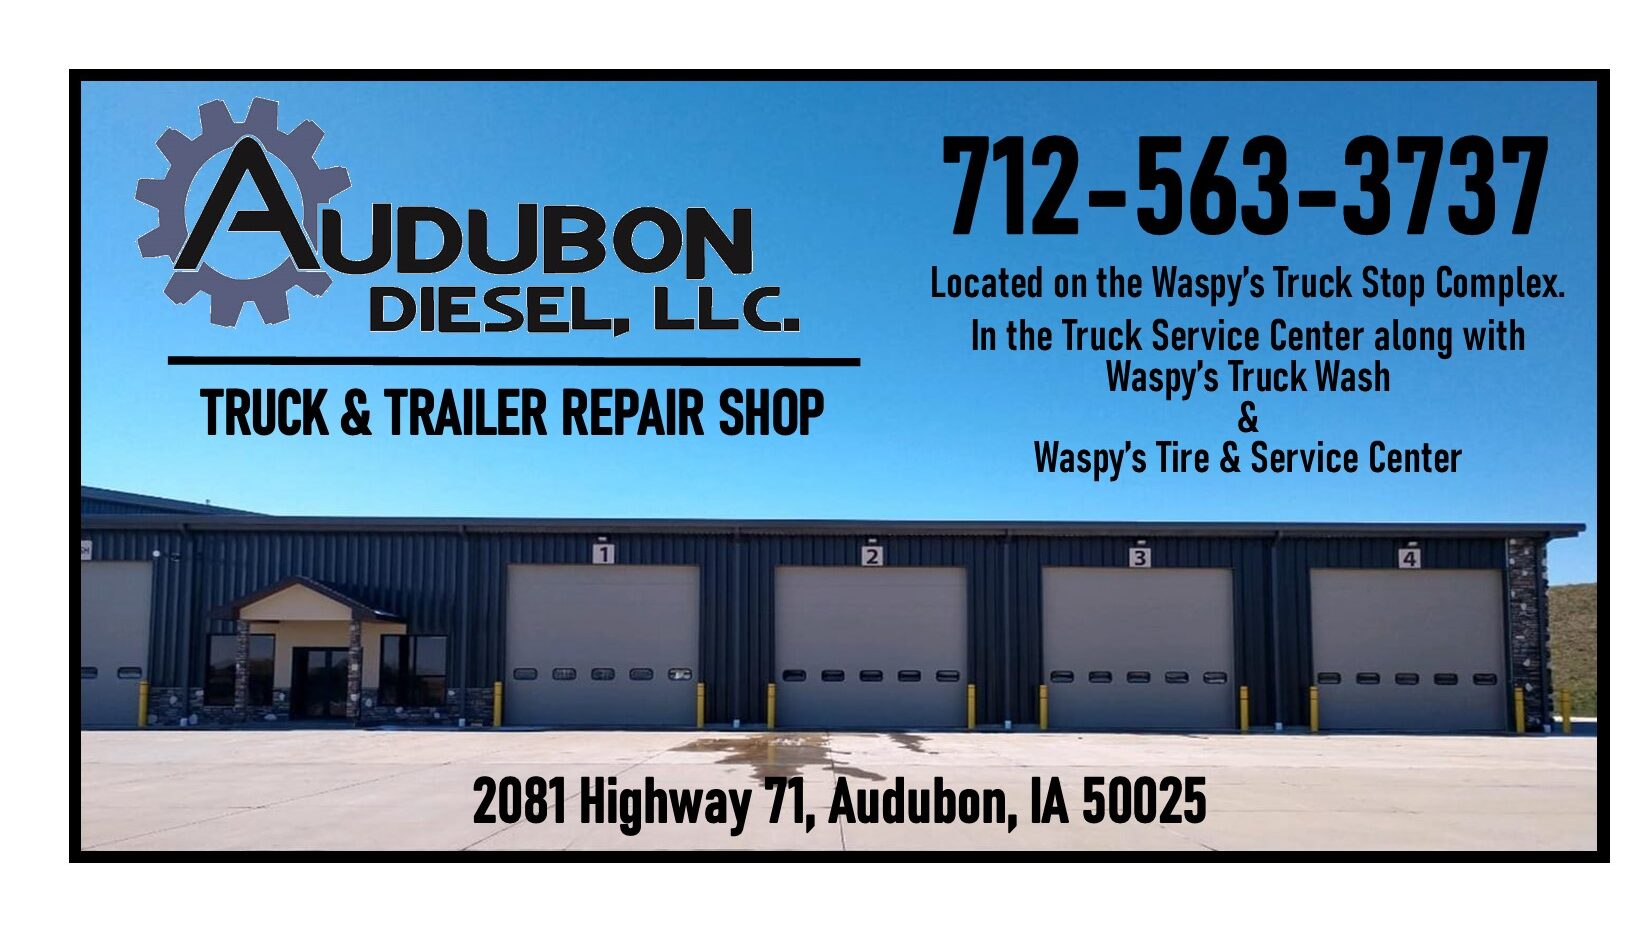 Audubon Diesel truck and trailer repair shop is located at Waspy's Truck Stop